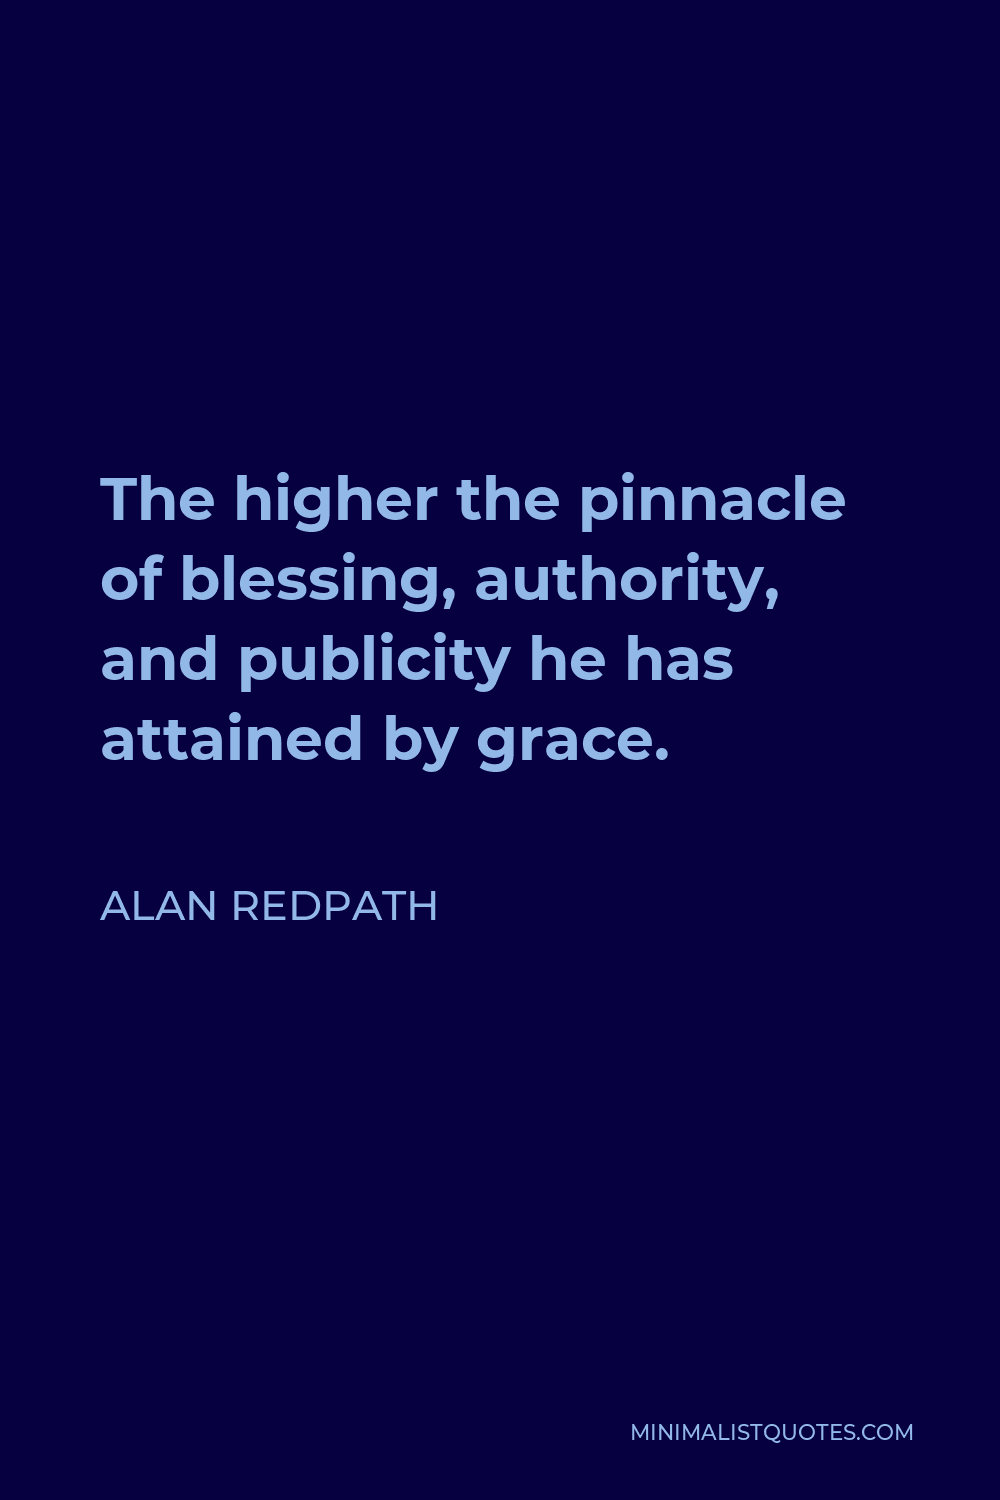 Alan Redpath Quote - The higher the pinnacle of blessing, authority, and publicity he has attained by grace.